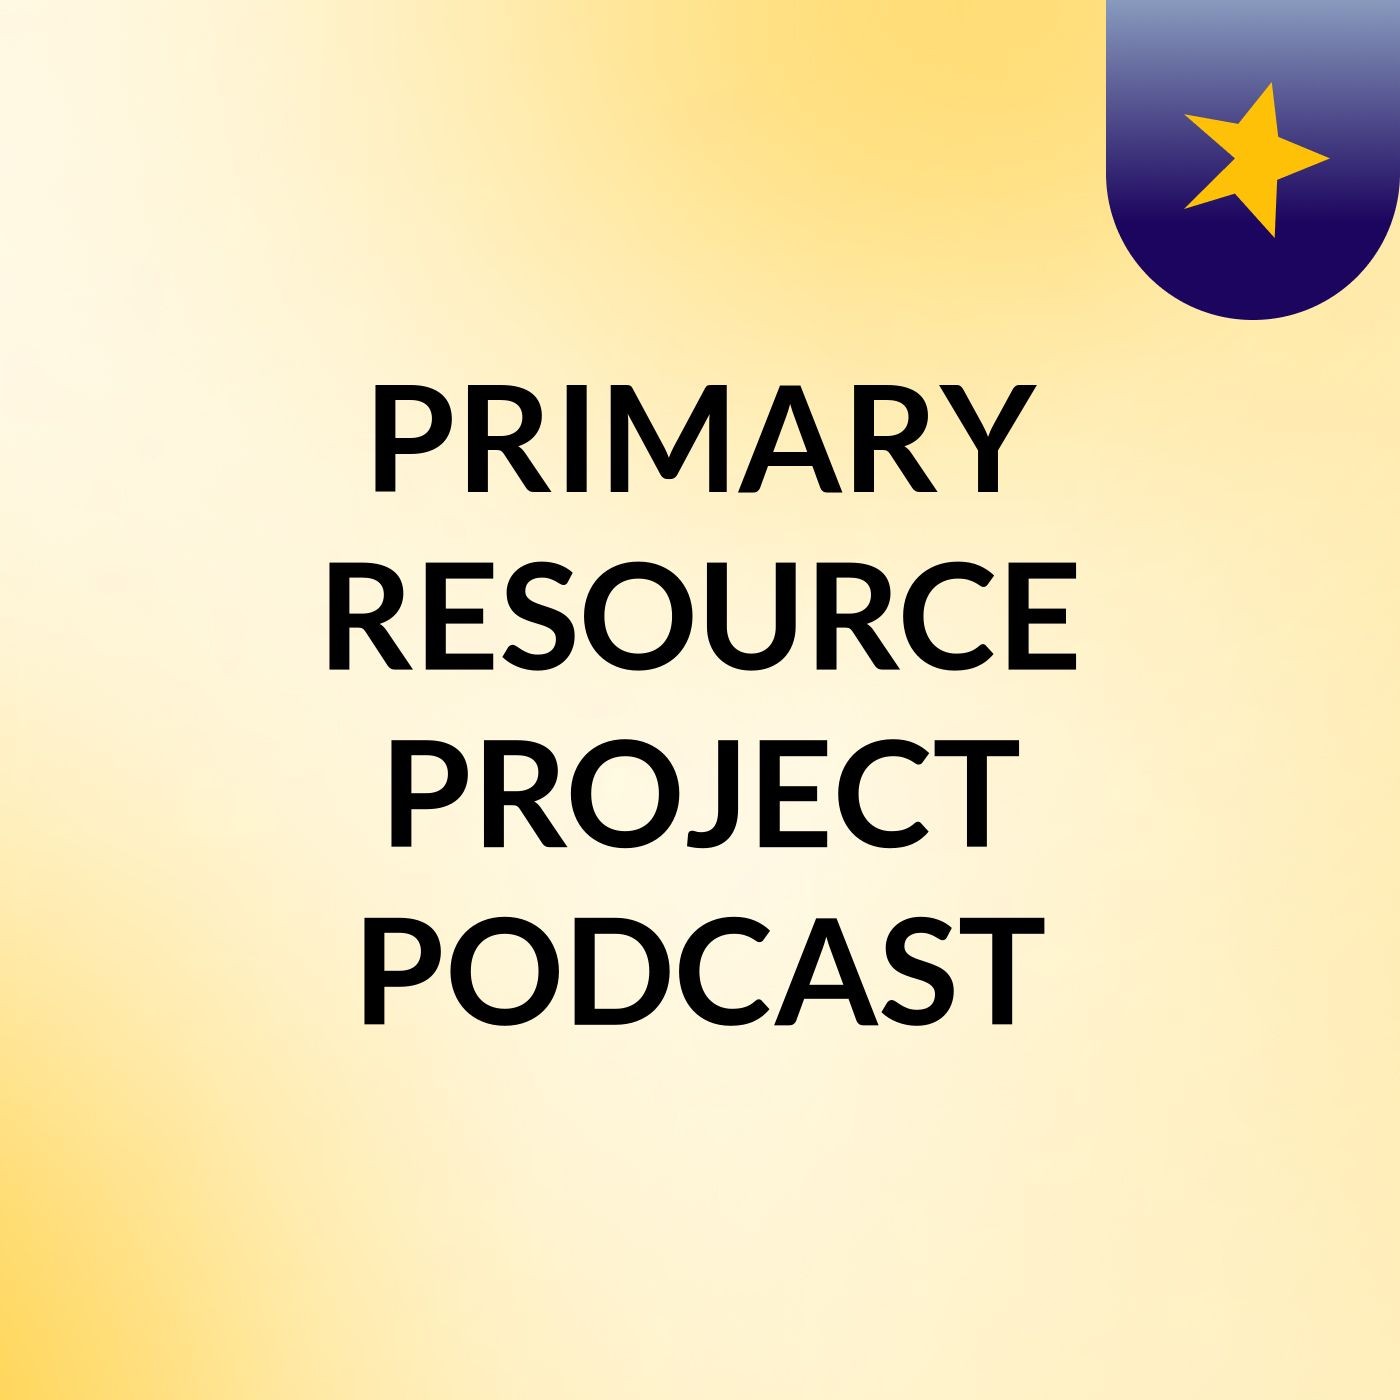 PRIMARY RESOURCE PROJECT PODCAST